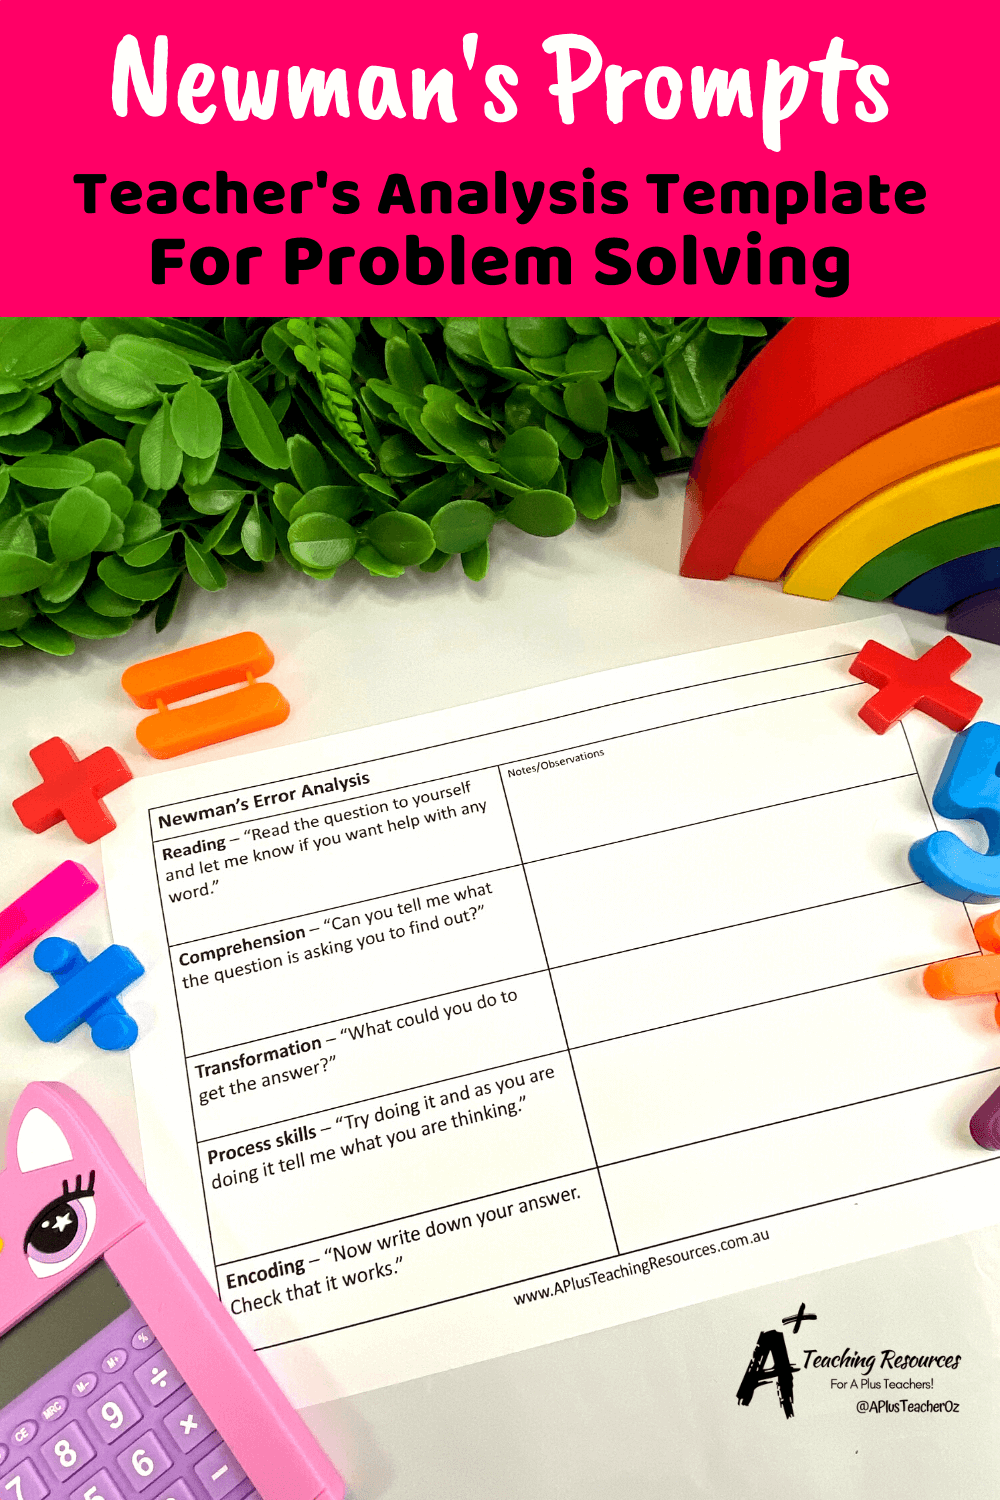 newman's theory of problem solving